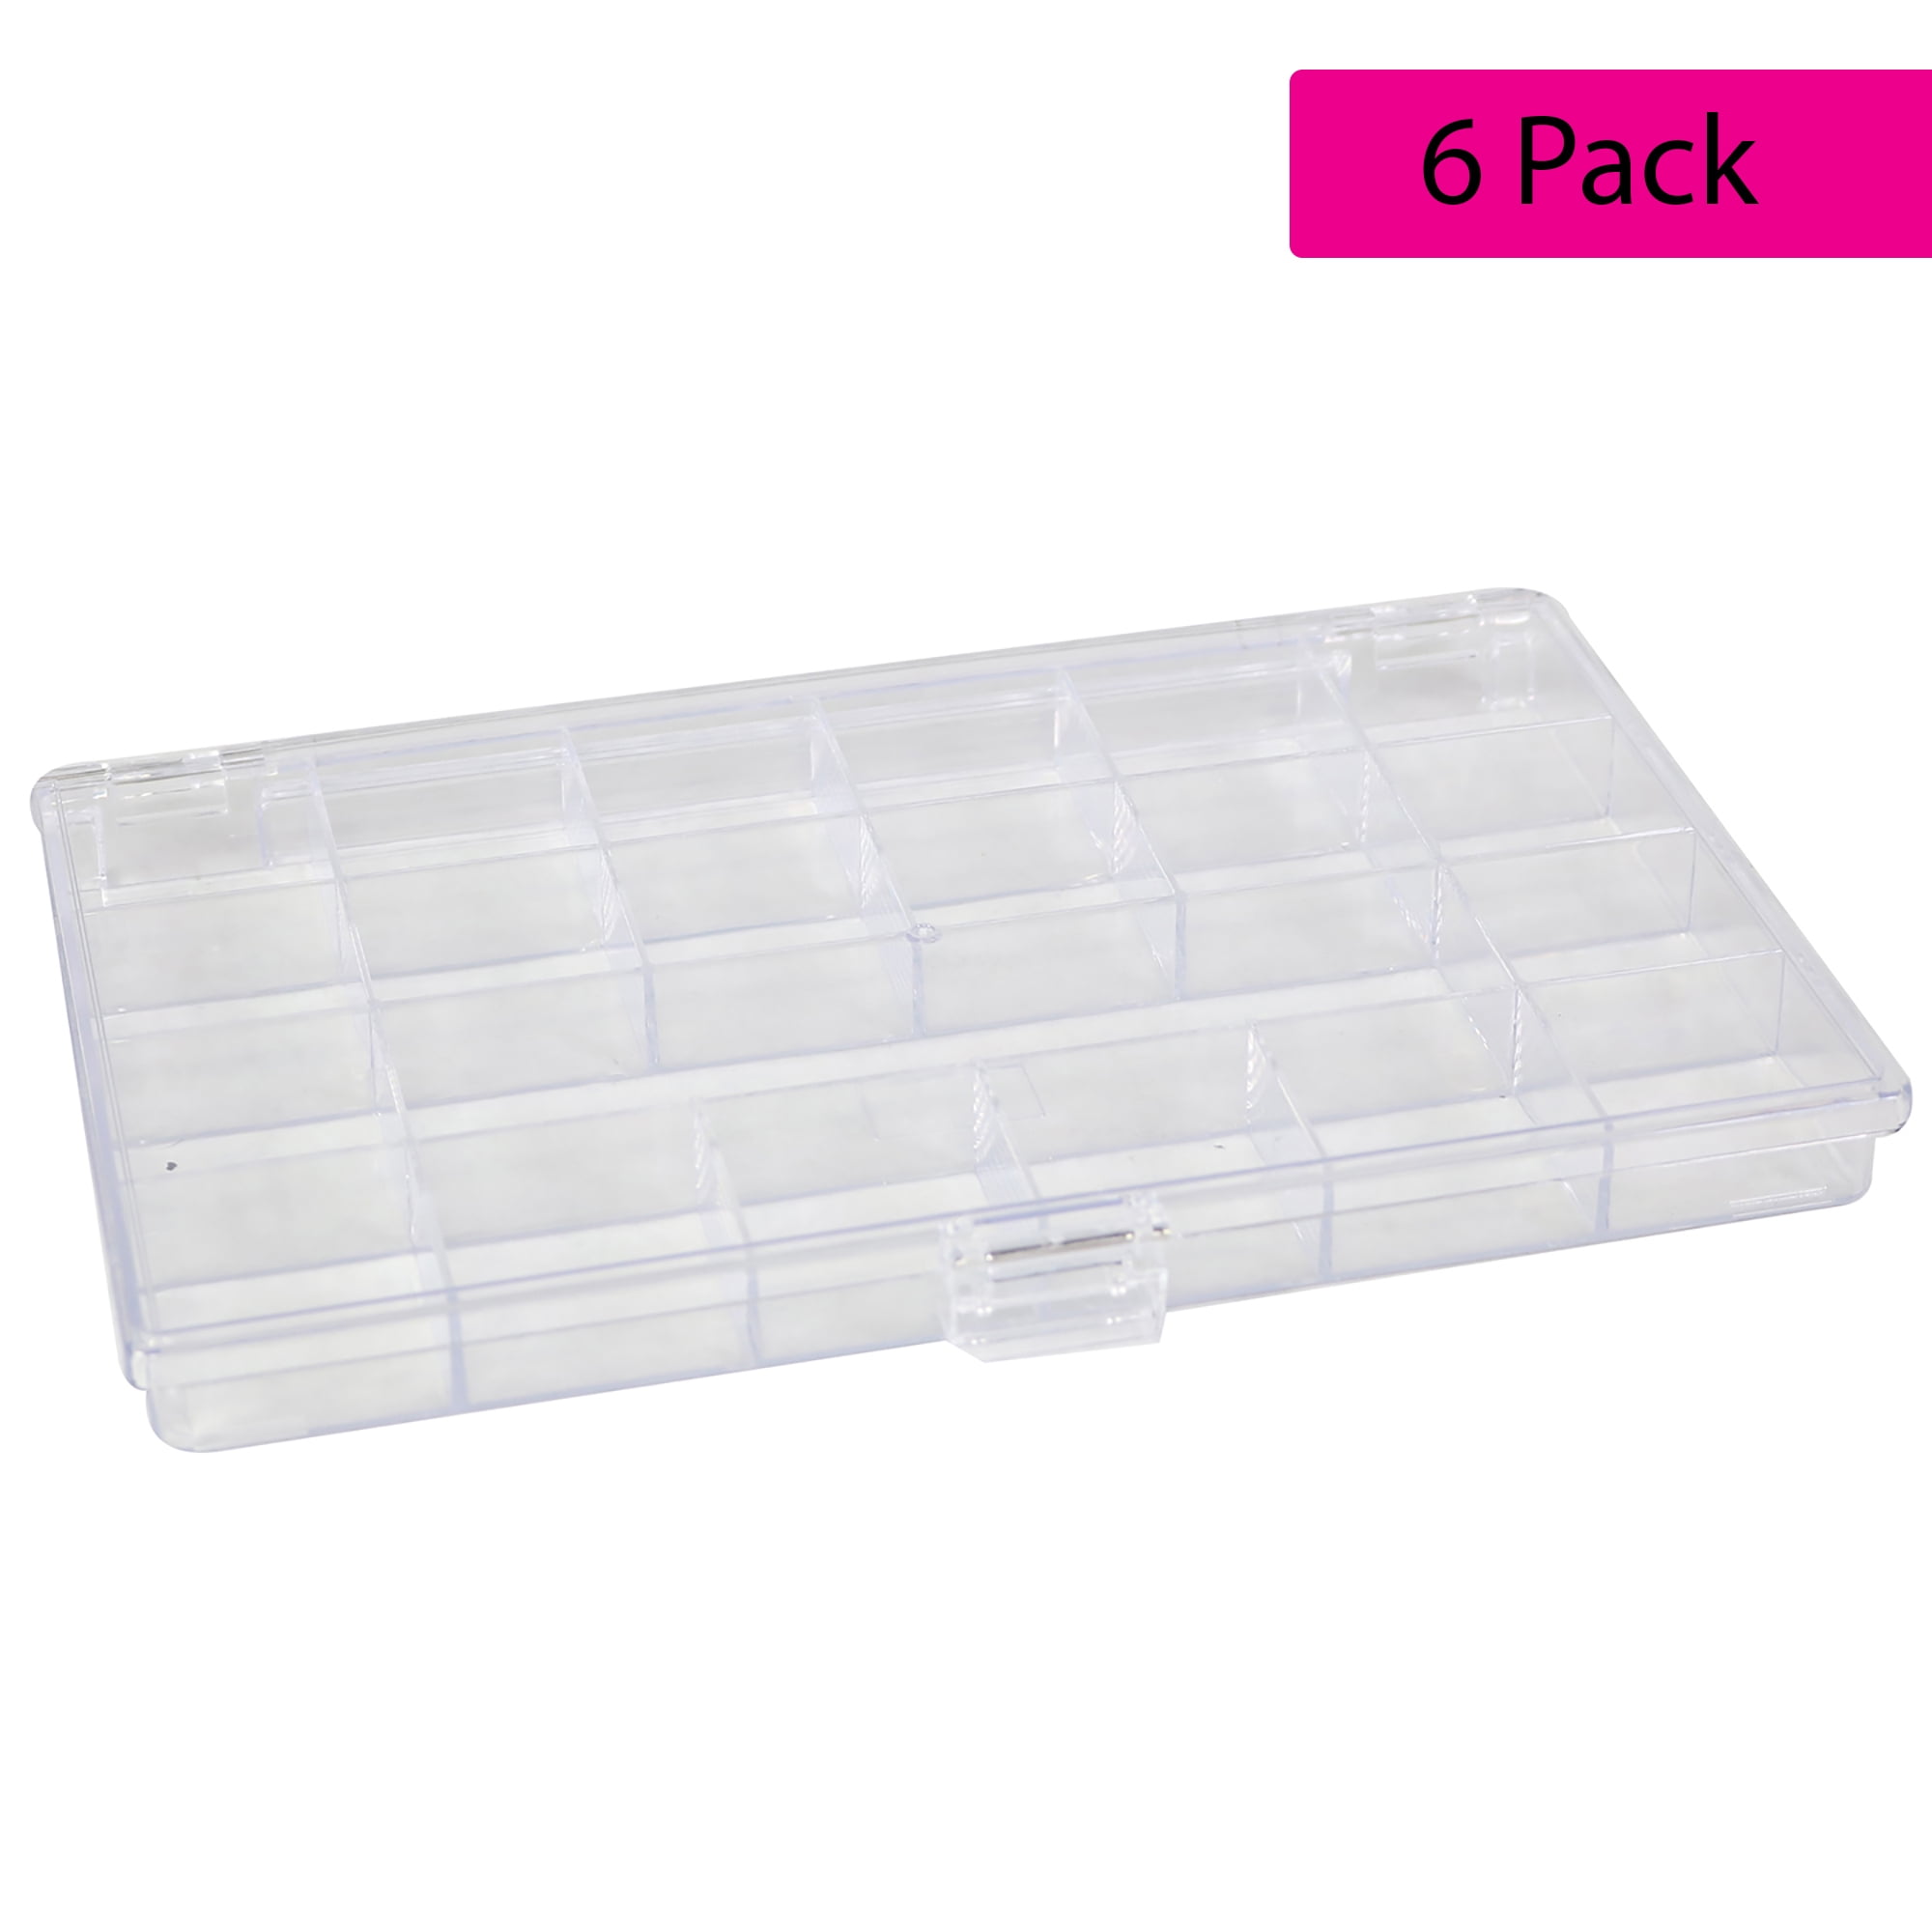 21 COMPARTMENT ORGANISER BOX CASE FOR WOOD SCREWS CLIPS FIXINGS ELECTRICIANS 